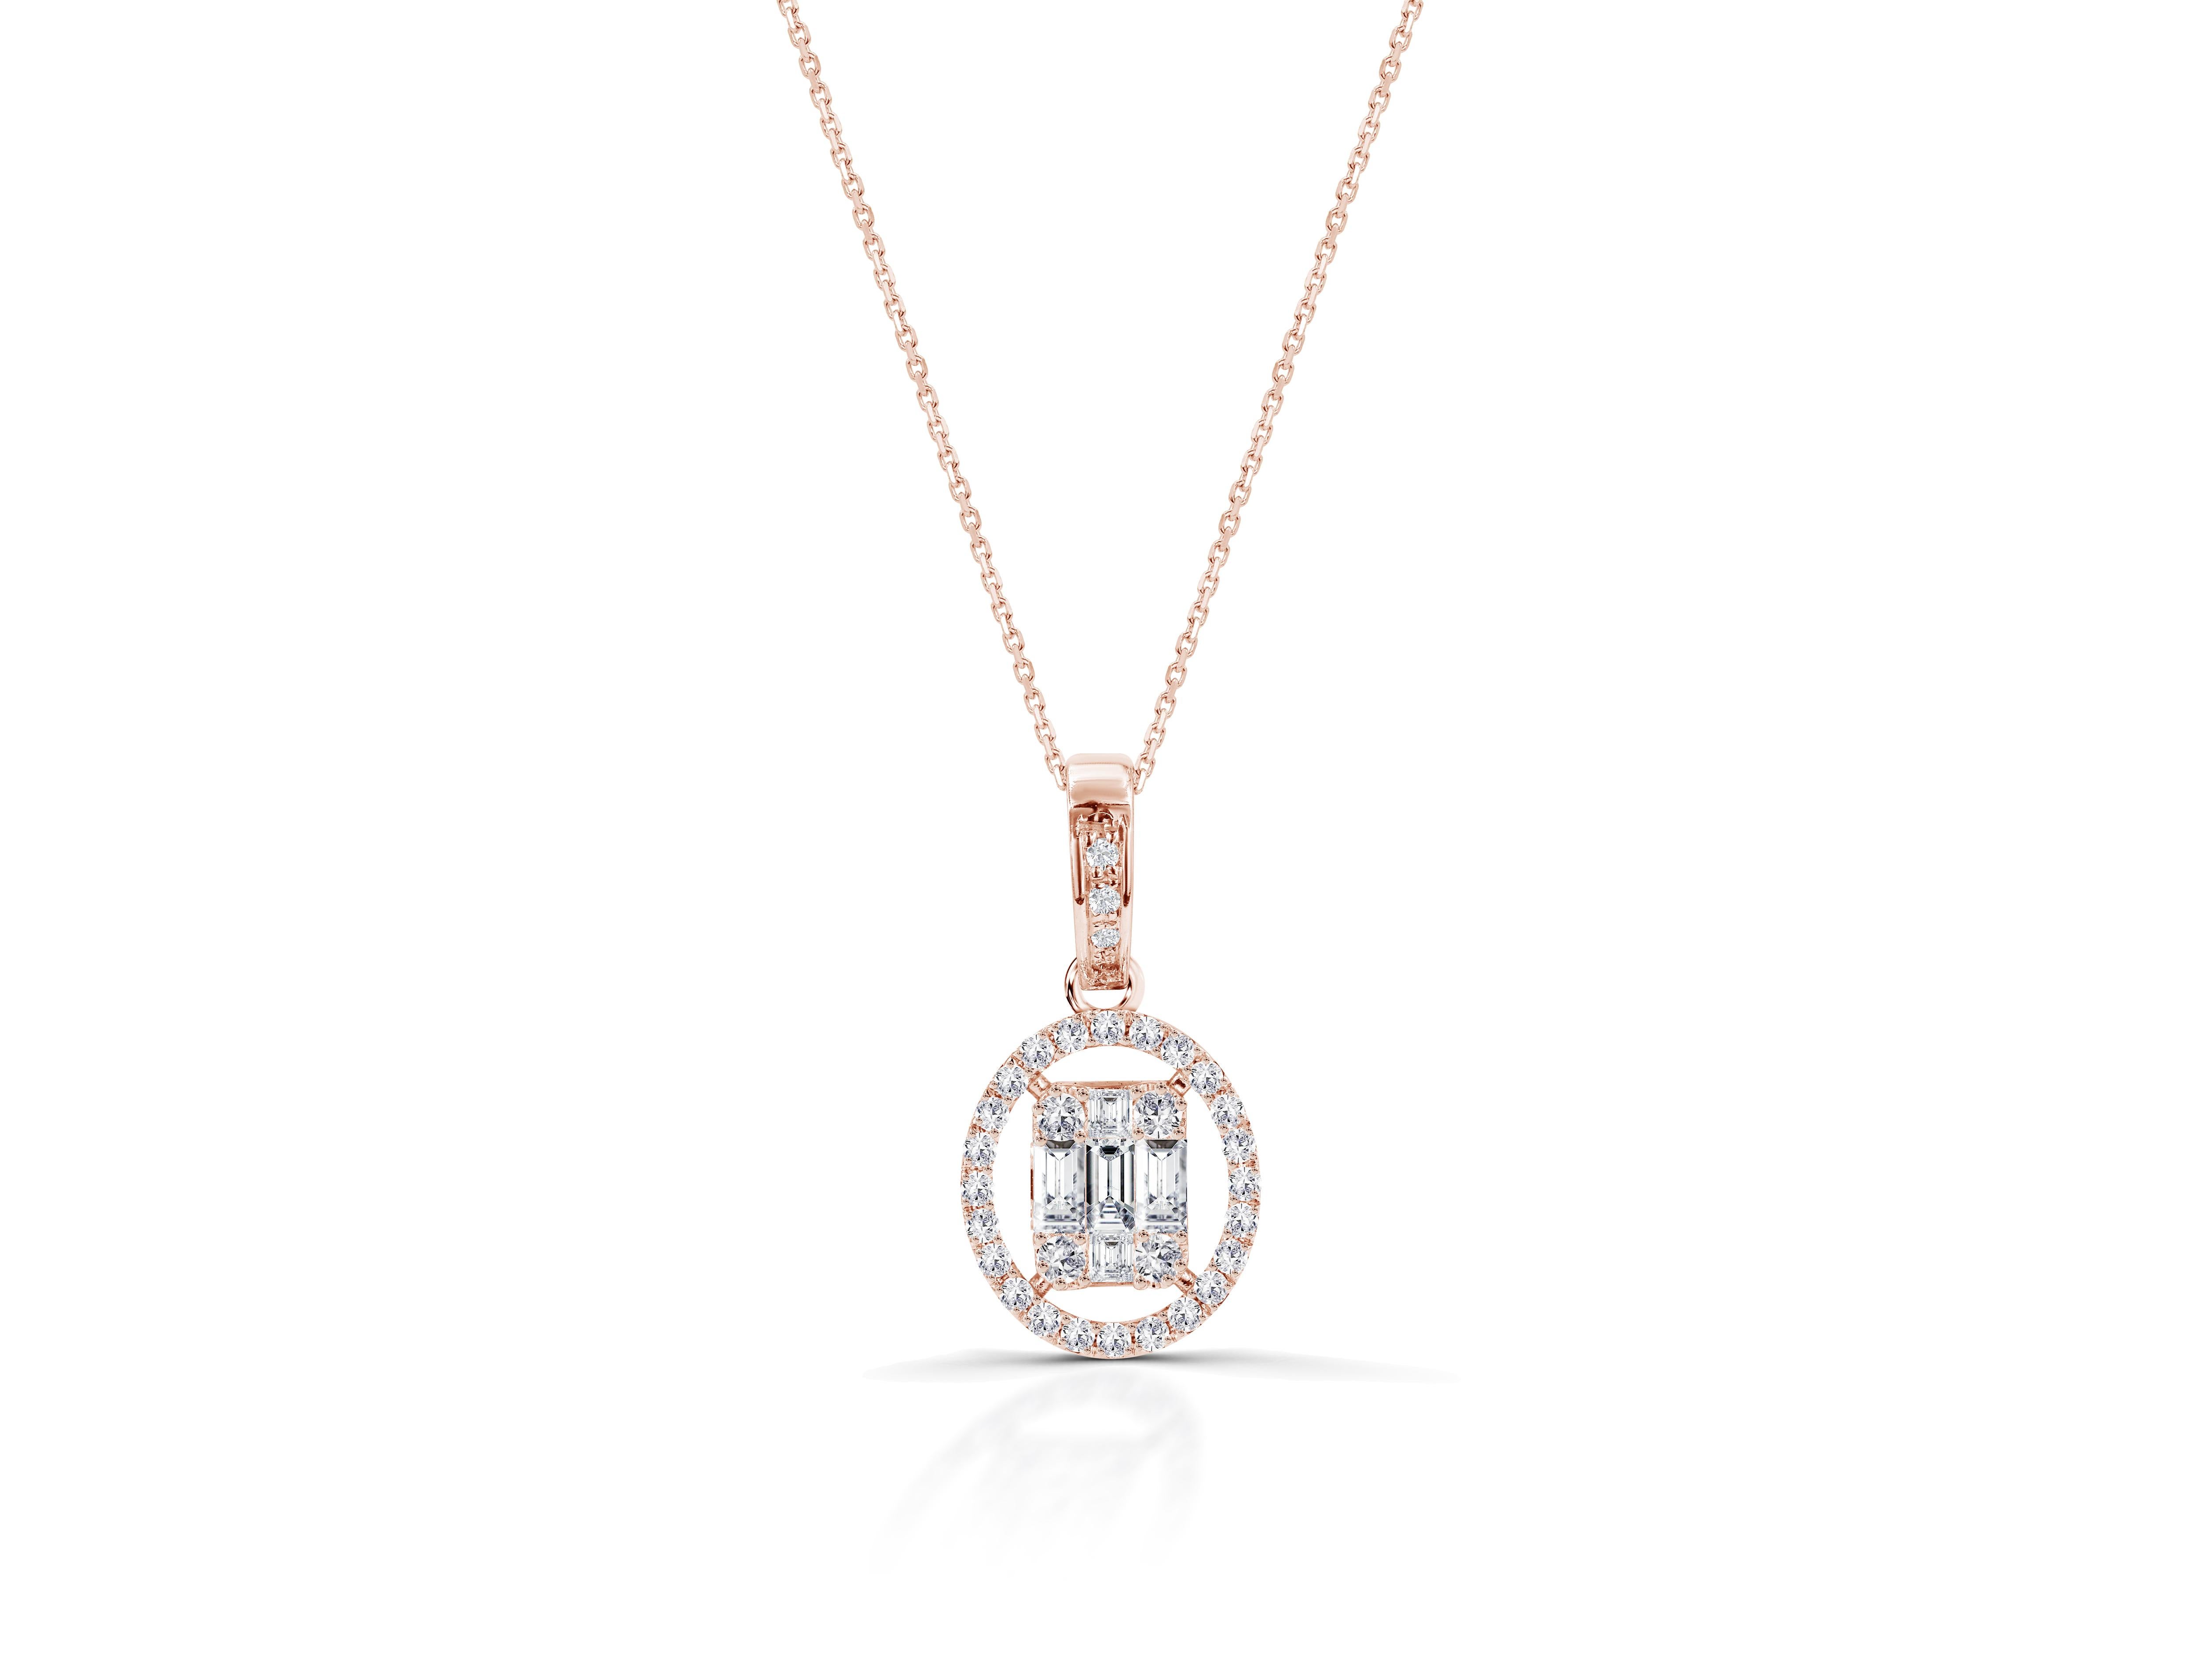 Halo baguette diamond necklace, baguette circle necklace, Elegant diamond necklace, Wedding necklace, 18k gold, Pave setted diamonds, gift for her

Baguette necklace, diamond cluster, Halo baguette cut diamond, wedding necklace, diamond pendant,